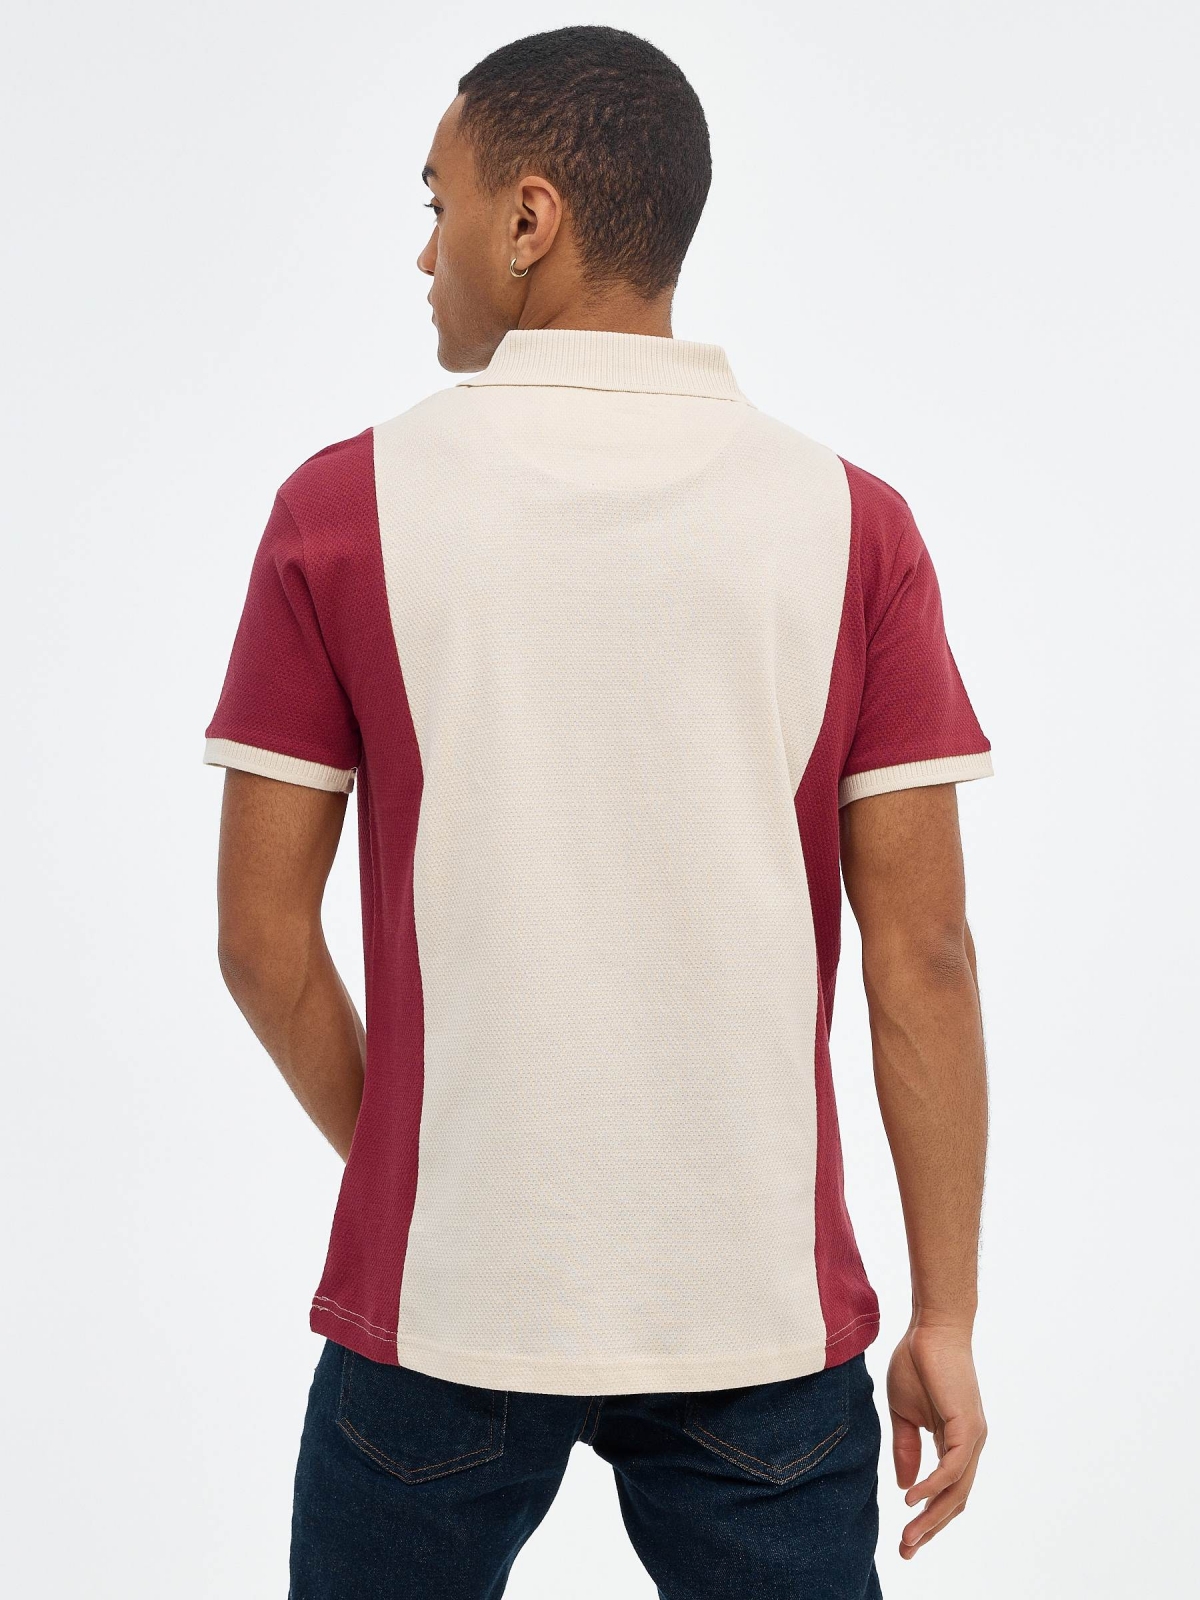 Maroon color block polo shirt sand middle back view